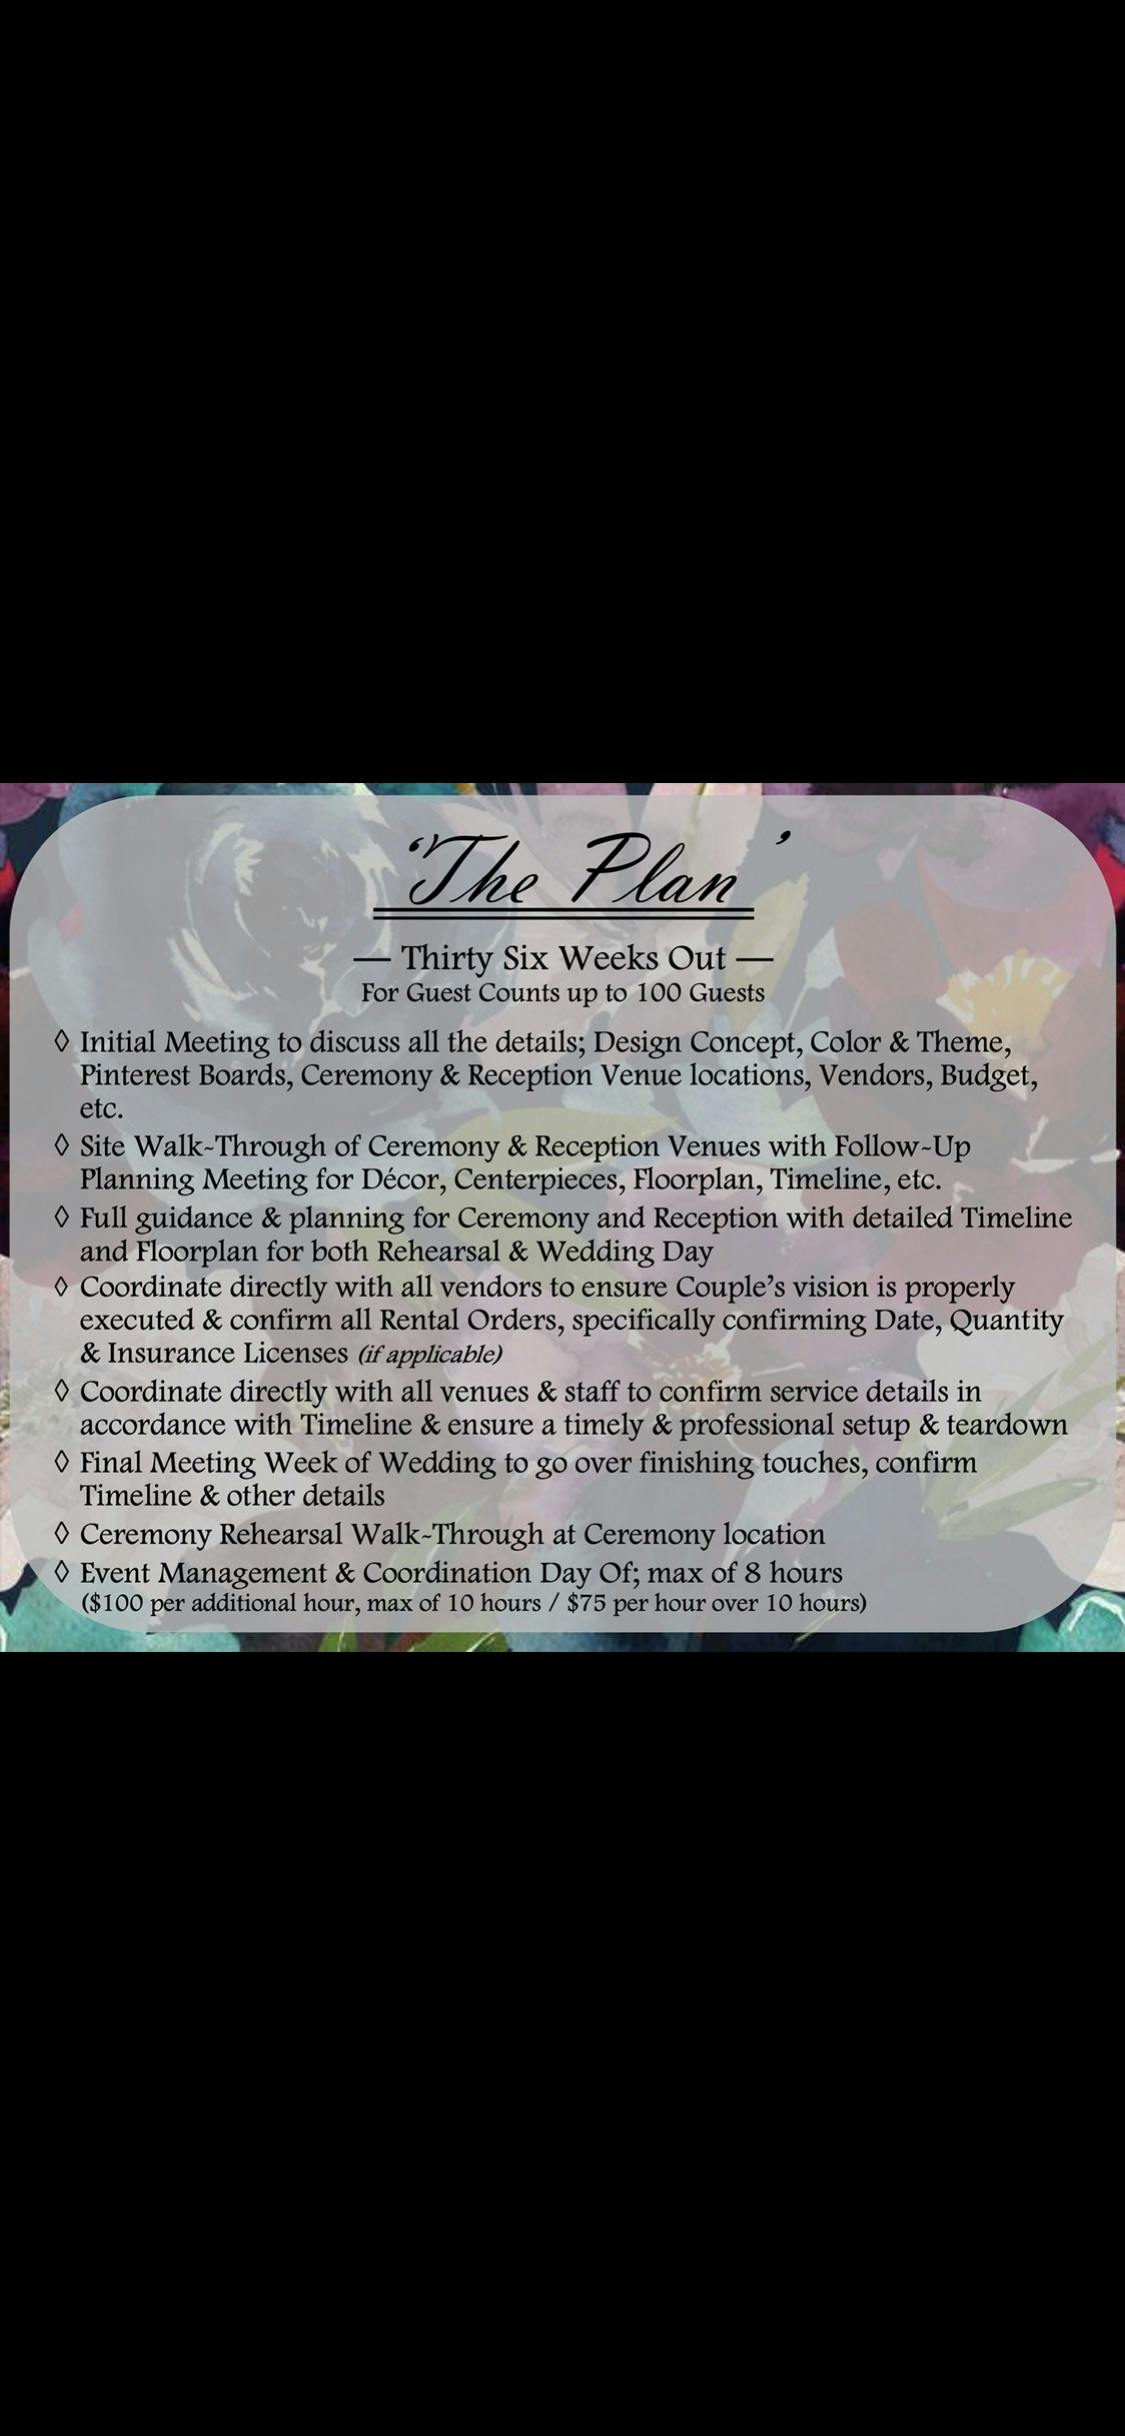 ‘The Plan’ Wedding Planning Package